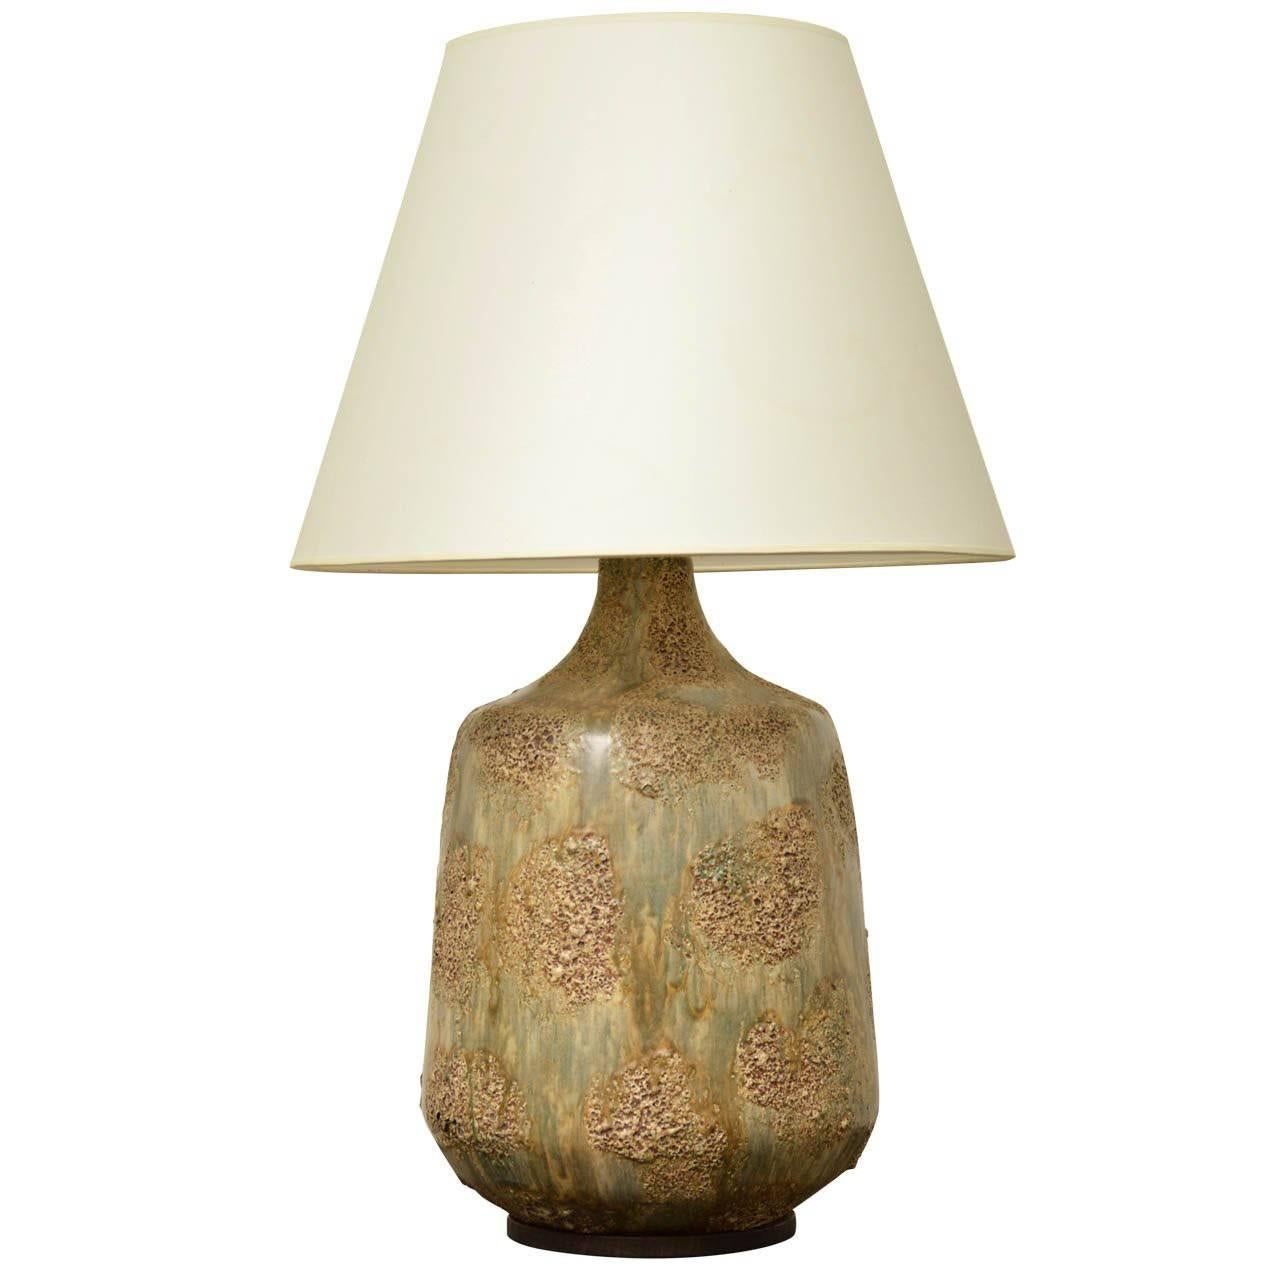 Large Midcentury Ceramic Lamp with Textured Brown and Green Glaze